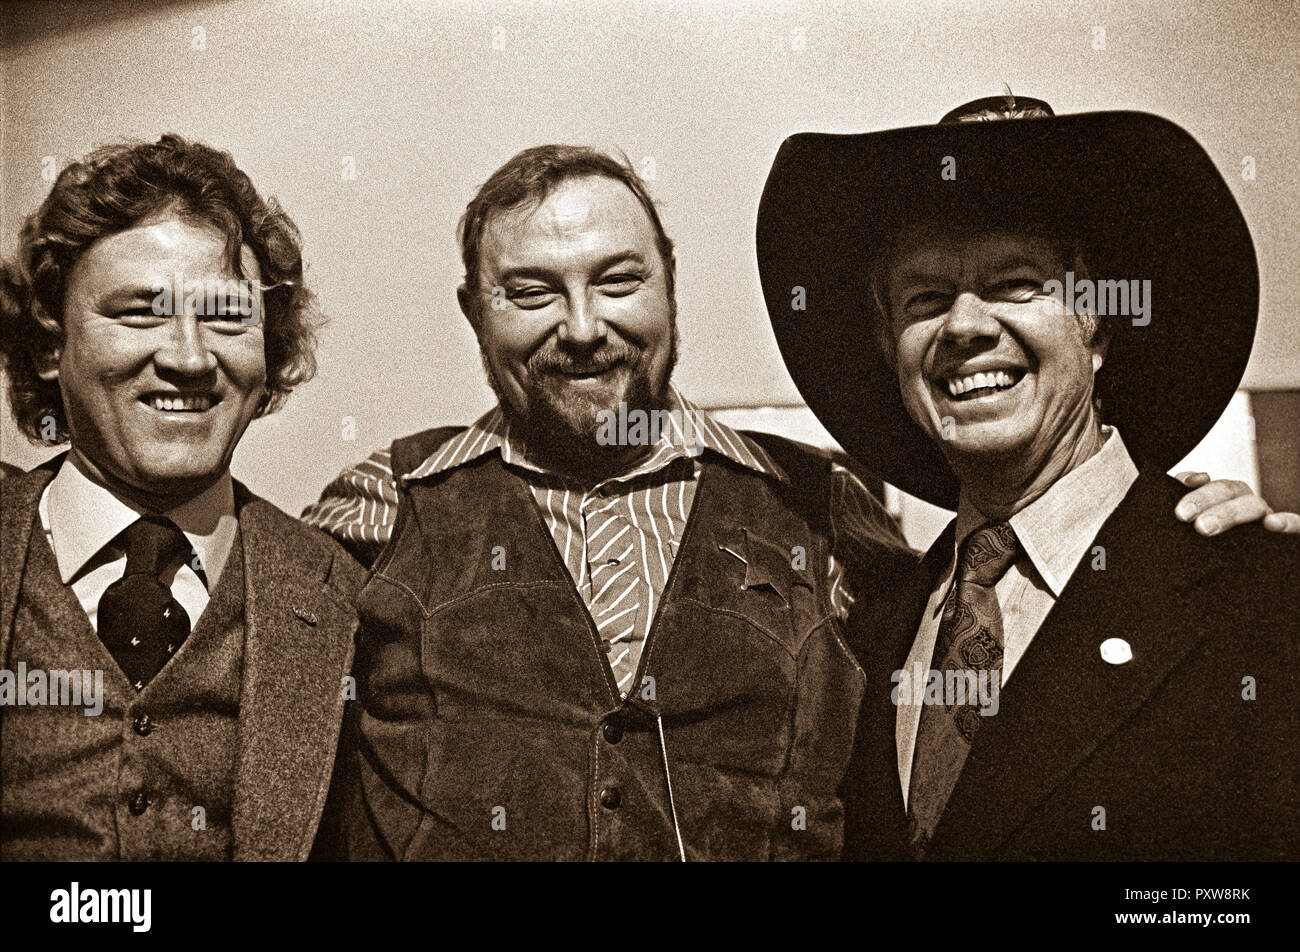 1976 Democratic presidential nominee Jimmy Carter wears the hat of country music performer Charlie Daniels (middle). At left is Carter friend and early supporter, Phil Walden, founder of Capricorn Records of Macon, Georgia. Daniels was playing a fundraiser at Atlanta's historic Fox Theater to benefit Carter's campaign. Stock Photo